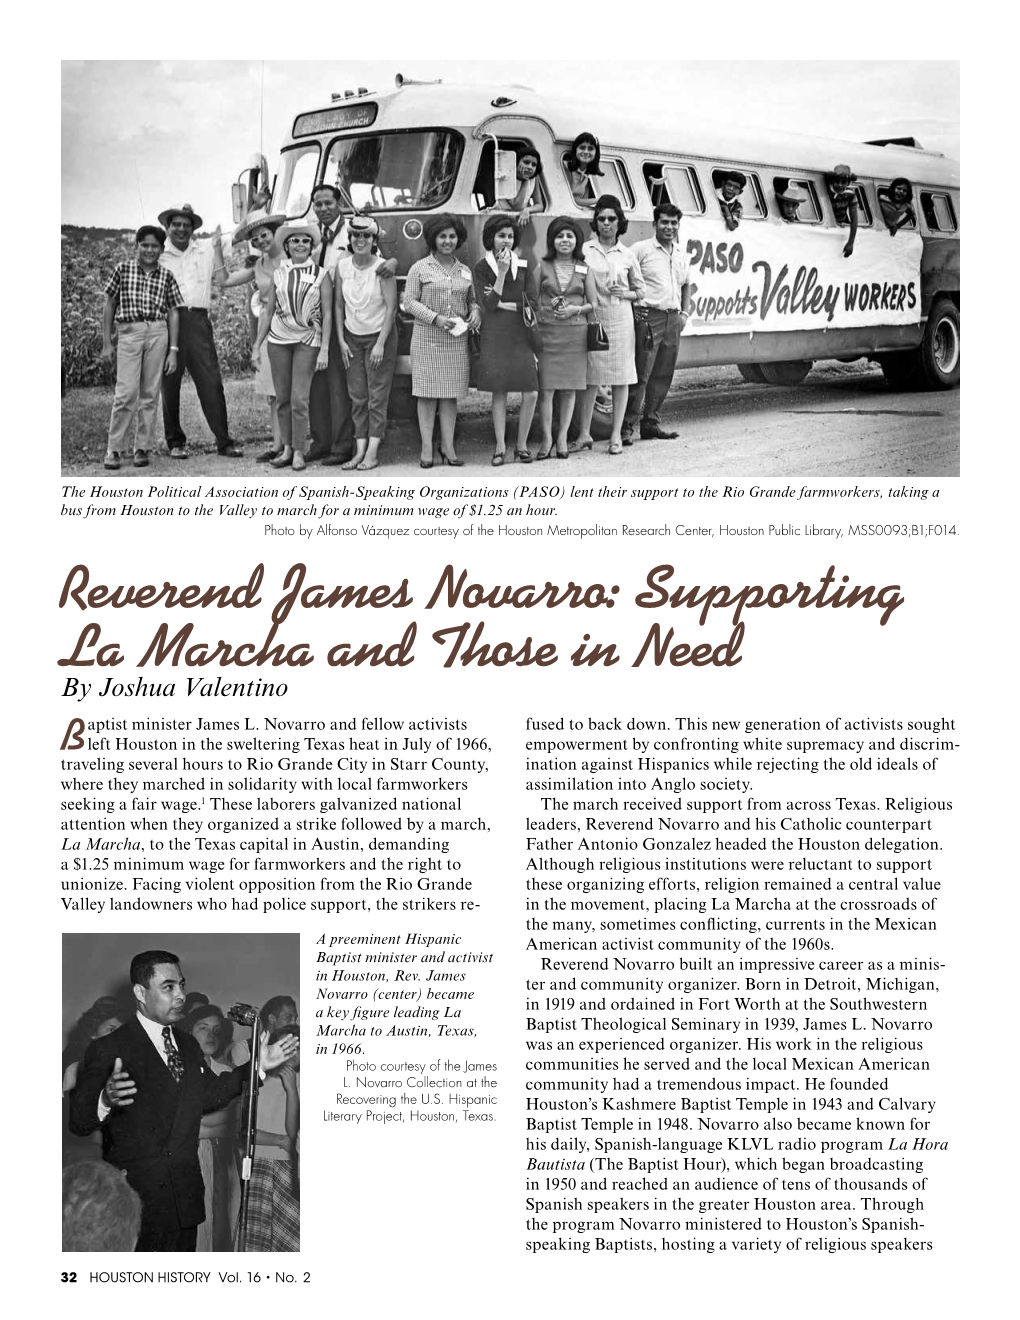 Reverend James Novarro: Supporting La Marcha and Those in Need by Joshua Valentino Aptist Minister James L